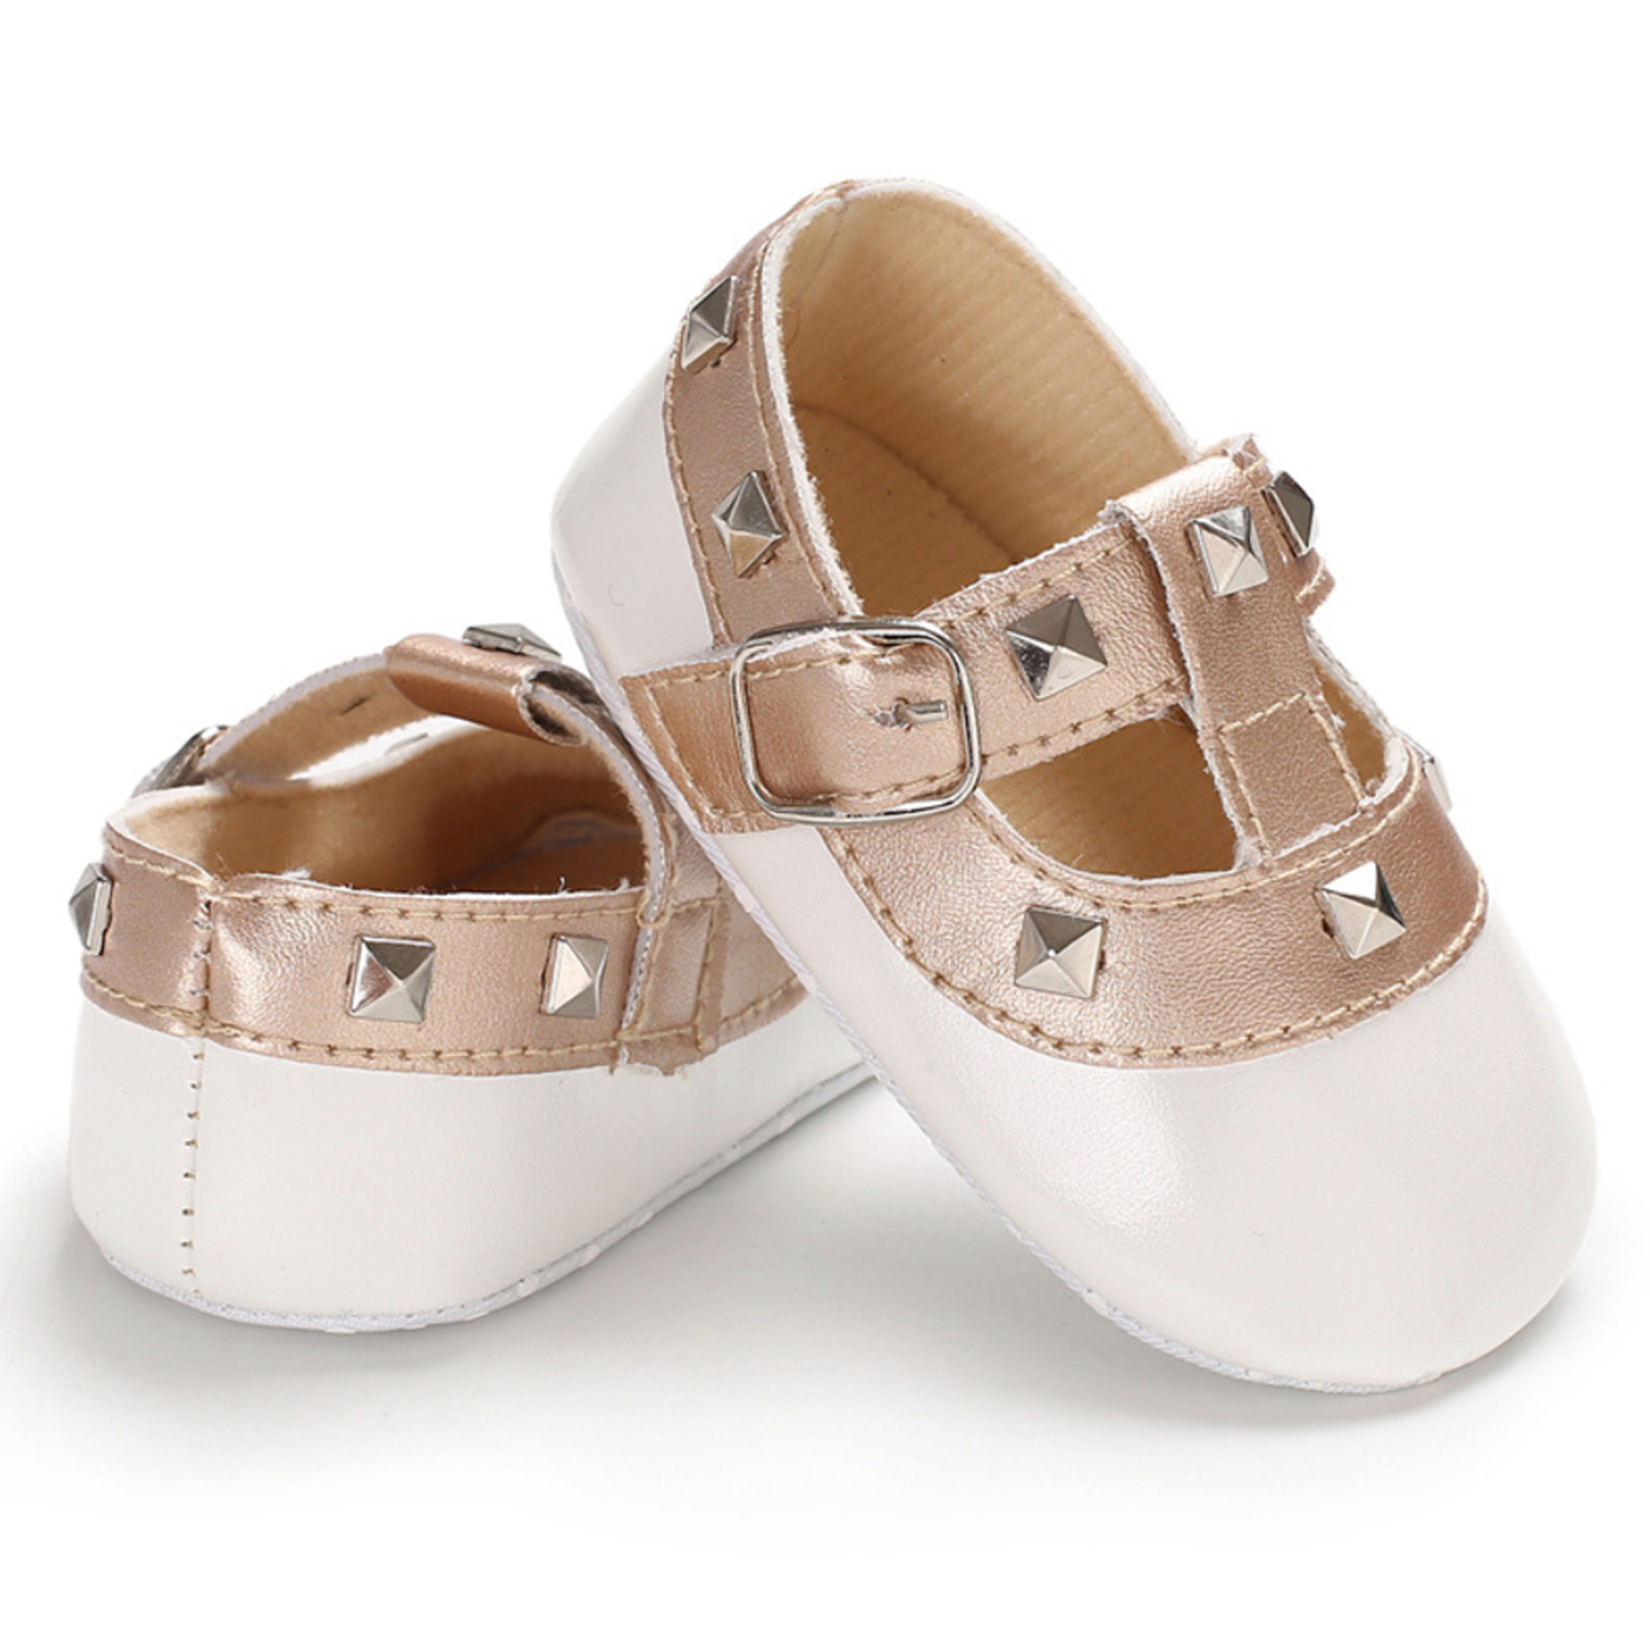 Valen-Tiny White Shoes For Babies Inspired by RockStuds – Baby Feet